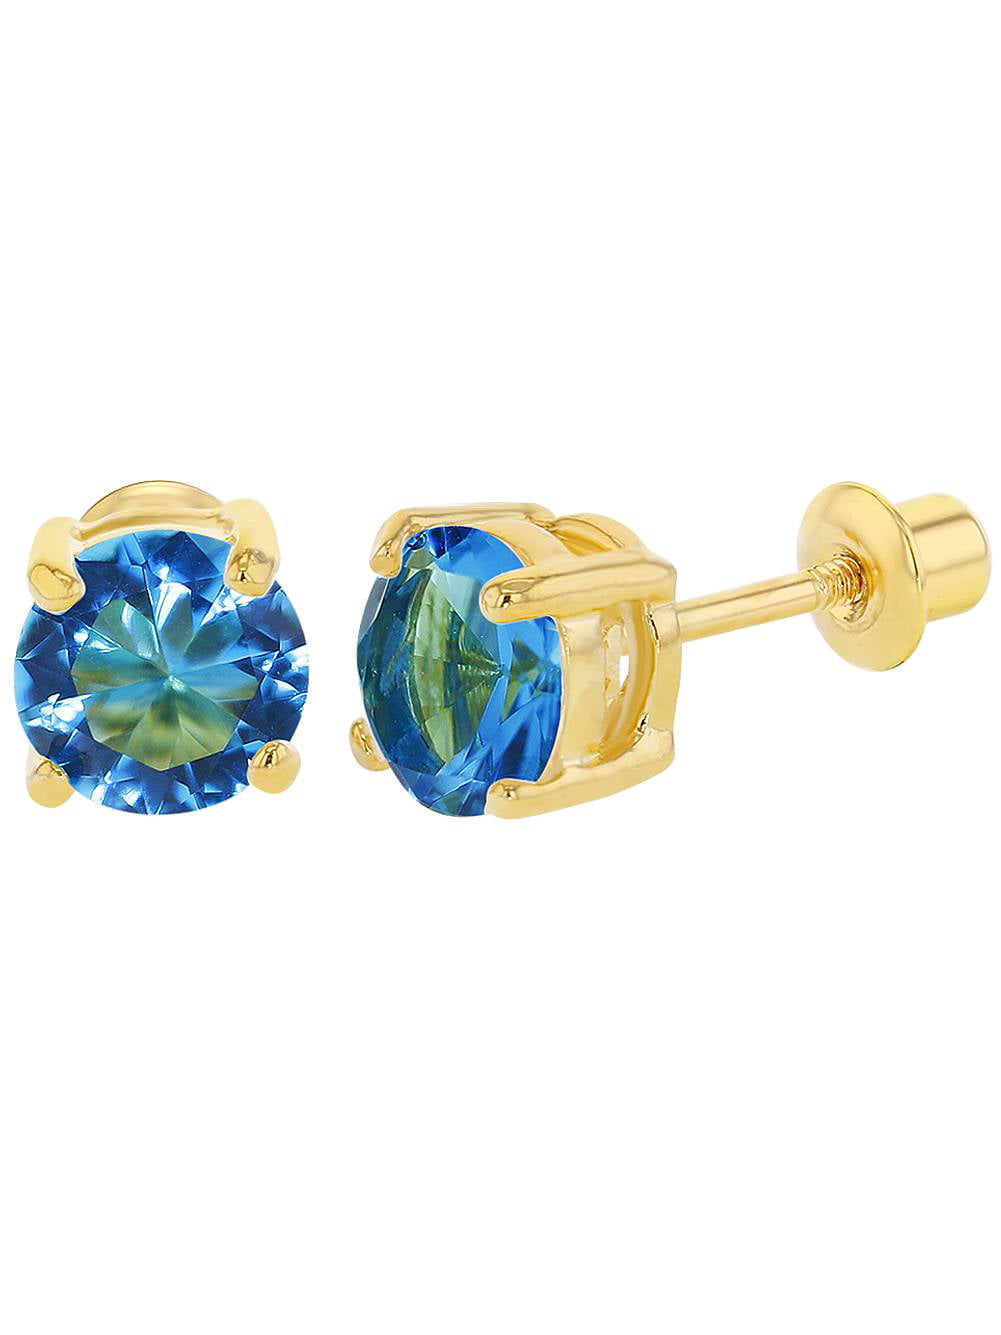 18k Gold Plated March Blue CZ Round Screw Back Earrings for Girls 6mm 